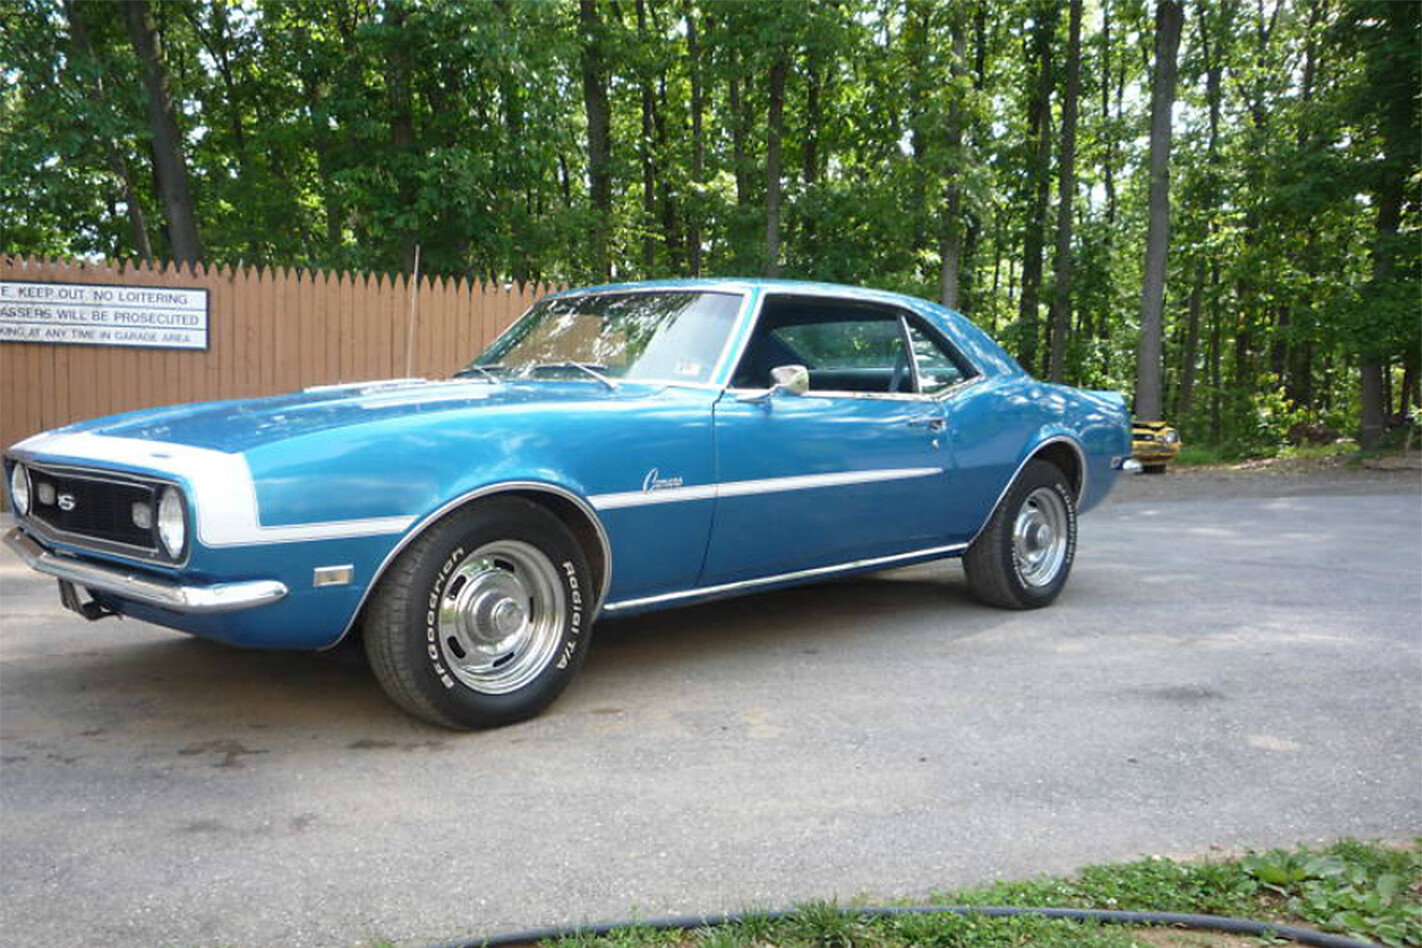 Home-Built Hero: This '68 Camaro Has Gone From Shell To Showstopper